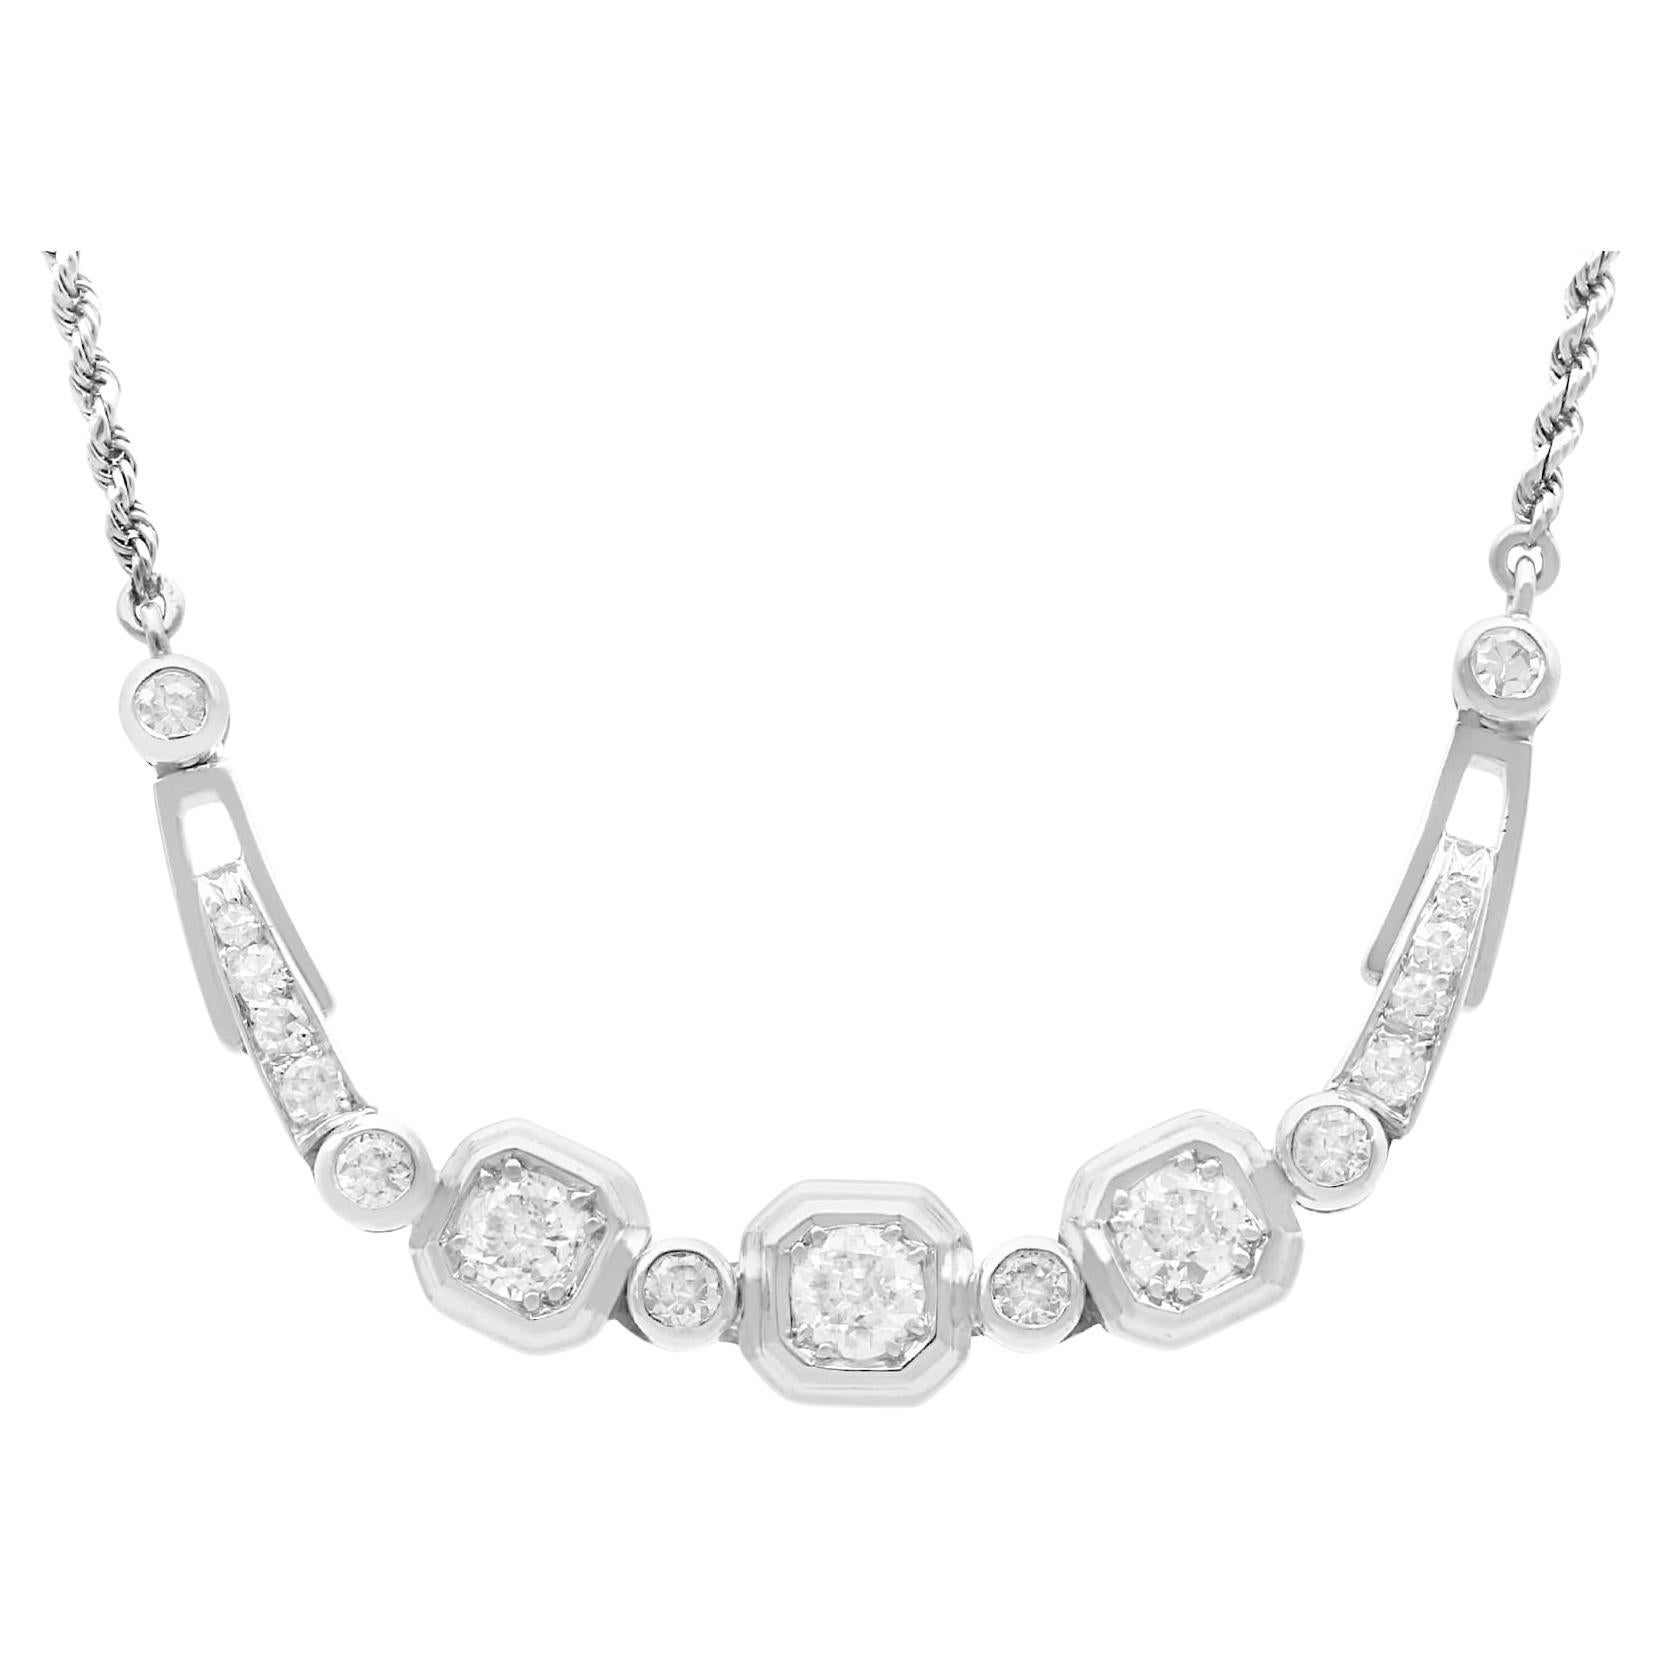 1920s 0.66 Carat Diamond and 18k White Gold Necklace